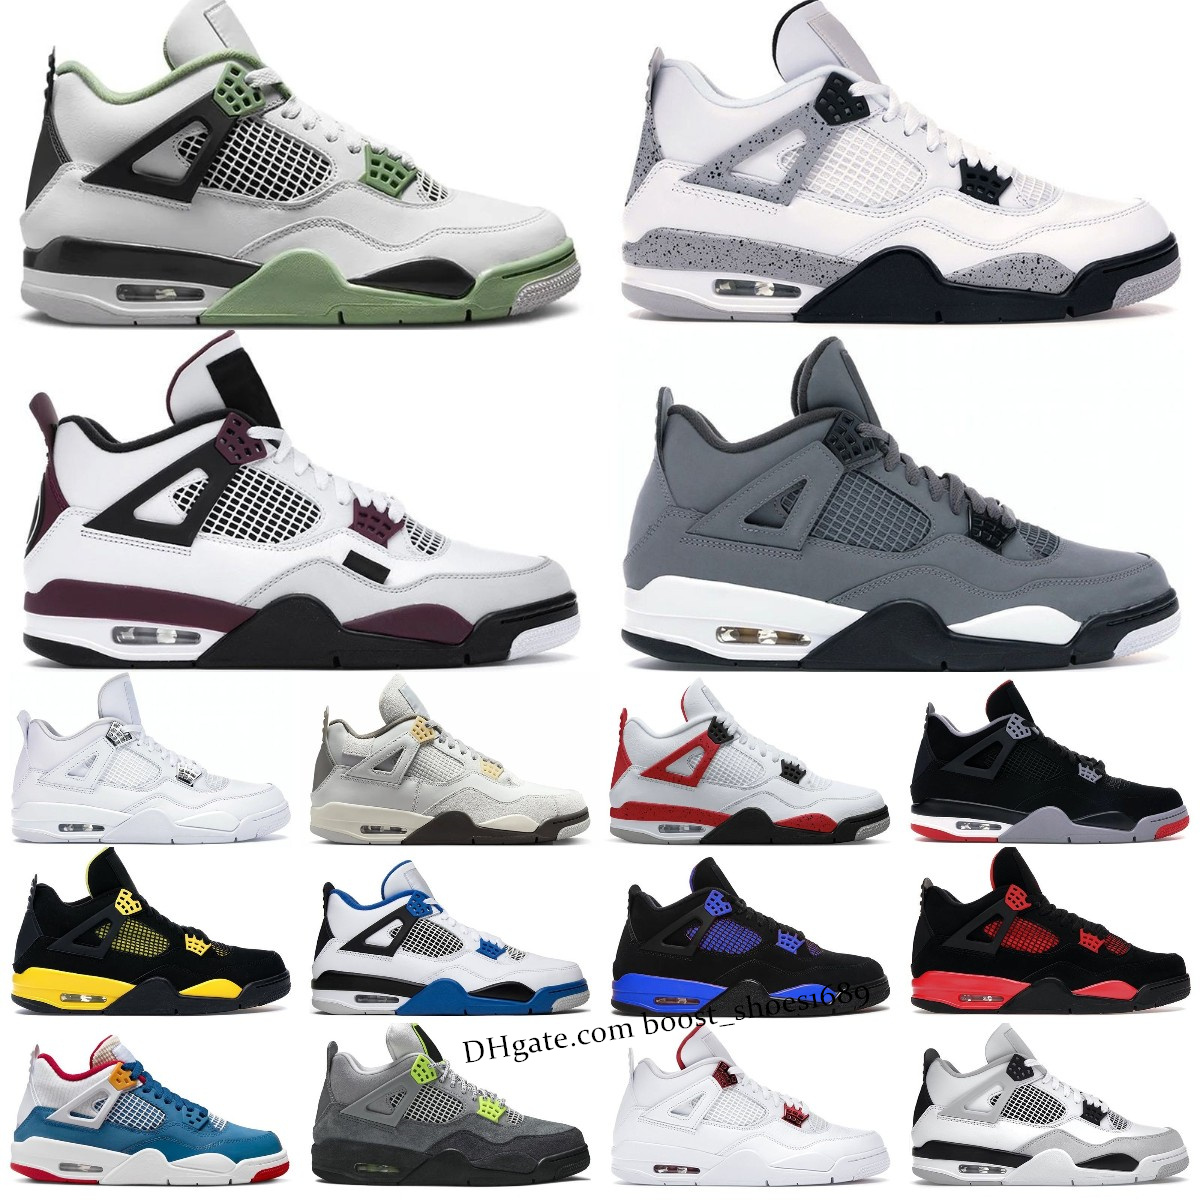 

Quality retro Basketball shoes 4 4s Jumpman Seafoam Shimmer Red Thunder Lightning White Oreo Taupe Haze Military Black Cat Bred cement men women Trainers sports 36-47, Bubble column